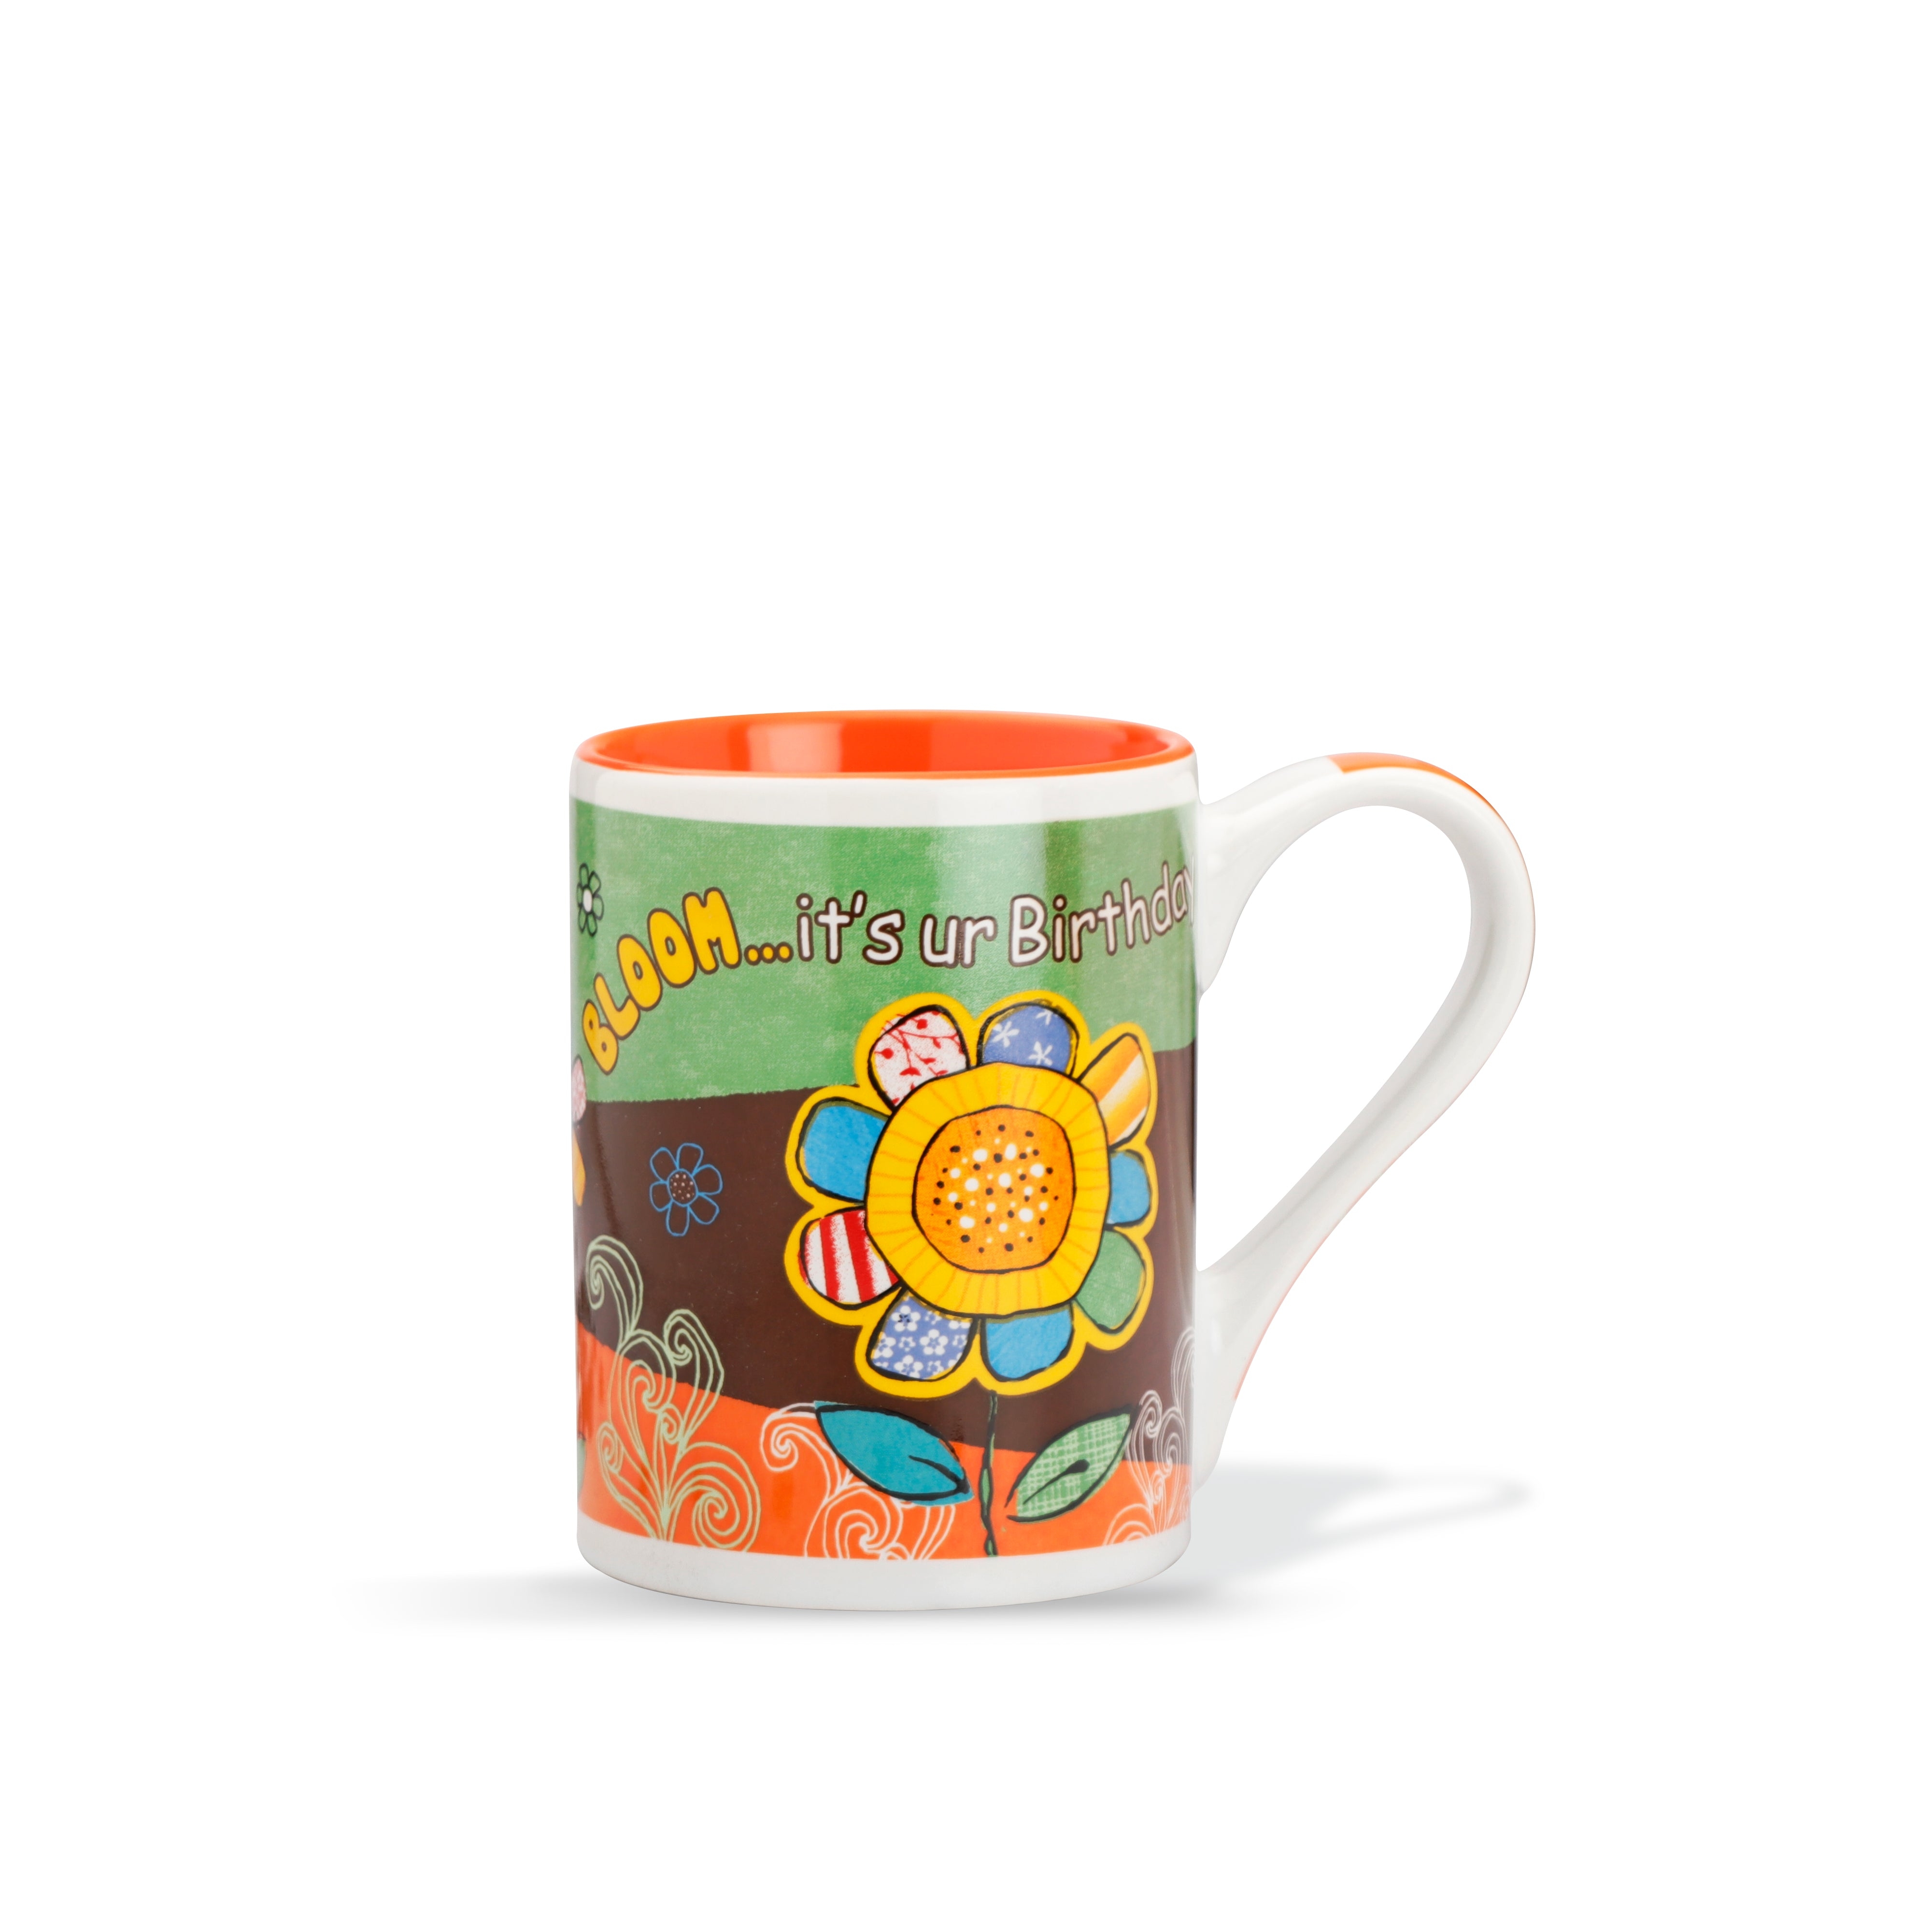 Archies | Archies ceremic Birthday  coffee mug " Bloom..it's ur Birthday "  printed for gifting someone